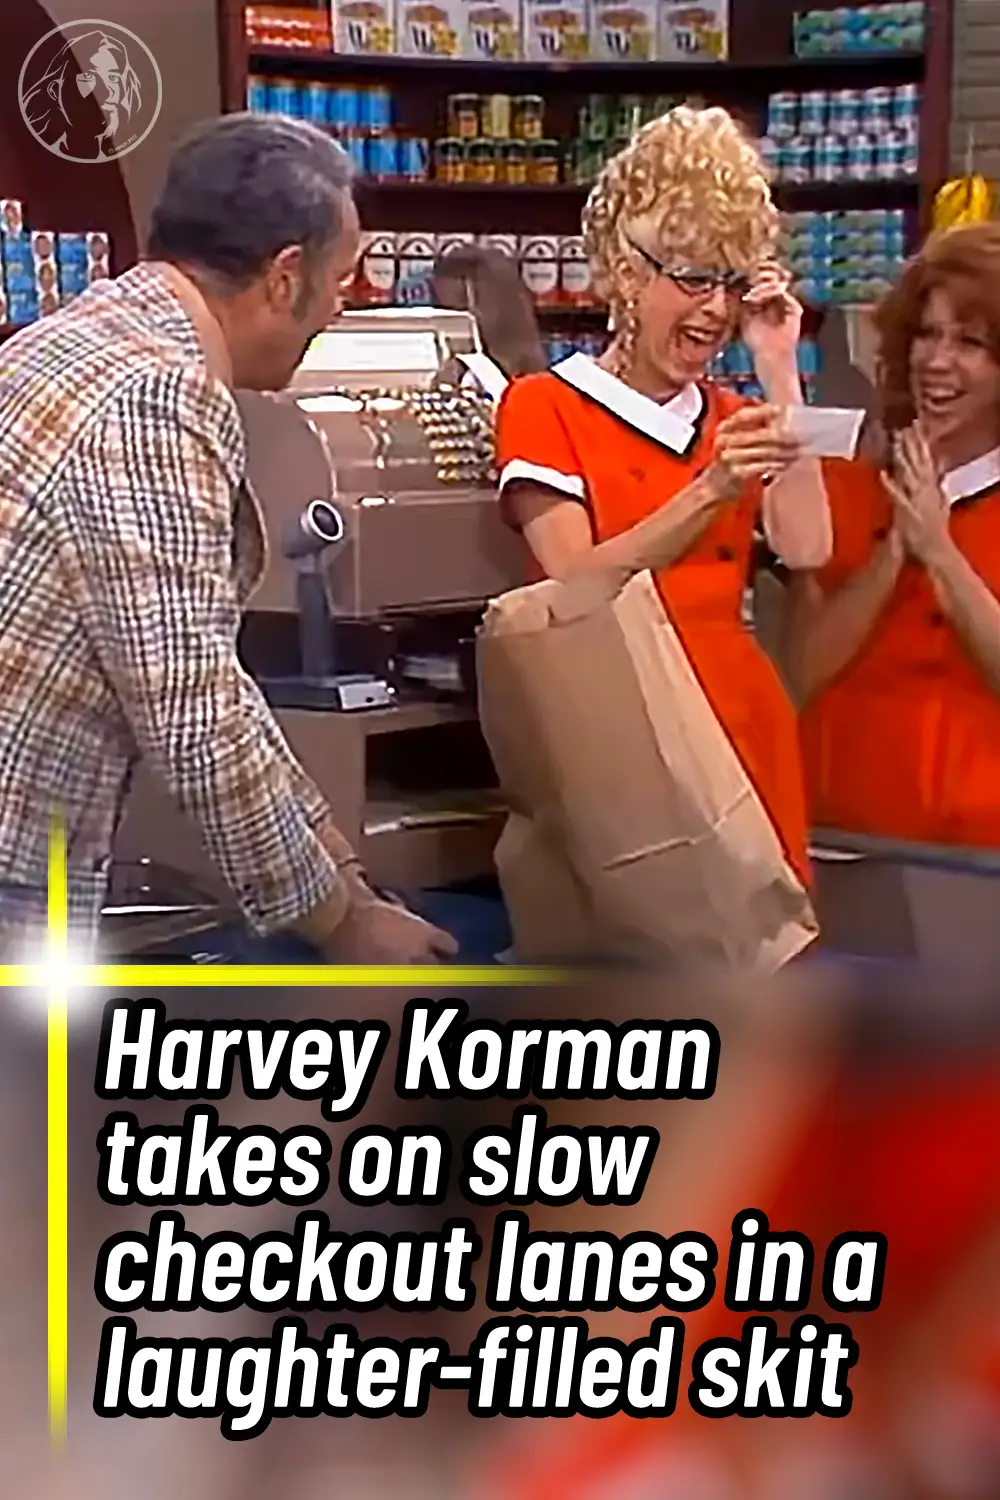 Harvey Korman takes on slow checkout lanes in a laughter-filled skit